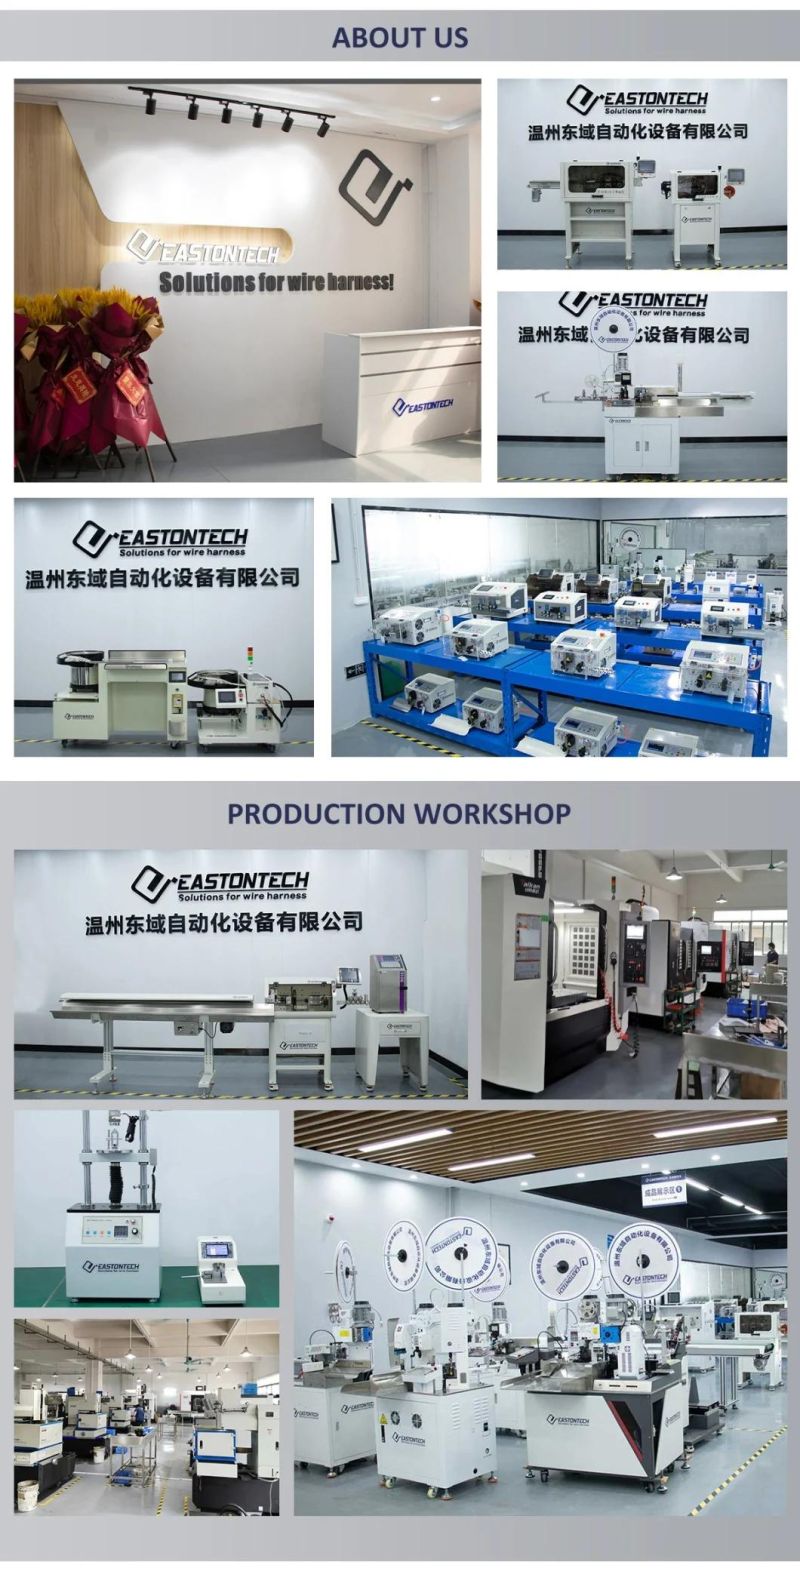 Eastontech Automatic Coaxial Cable Stripping Machine Programmable Cable Stripping Machine